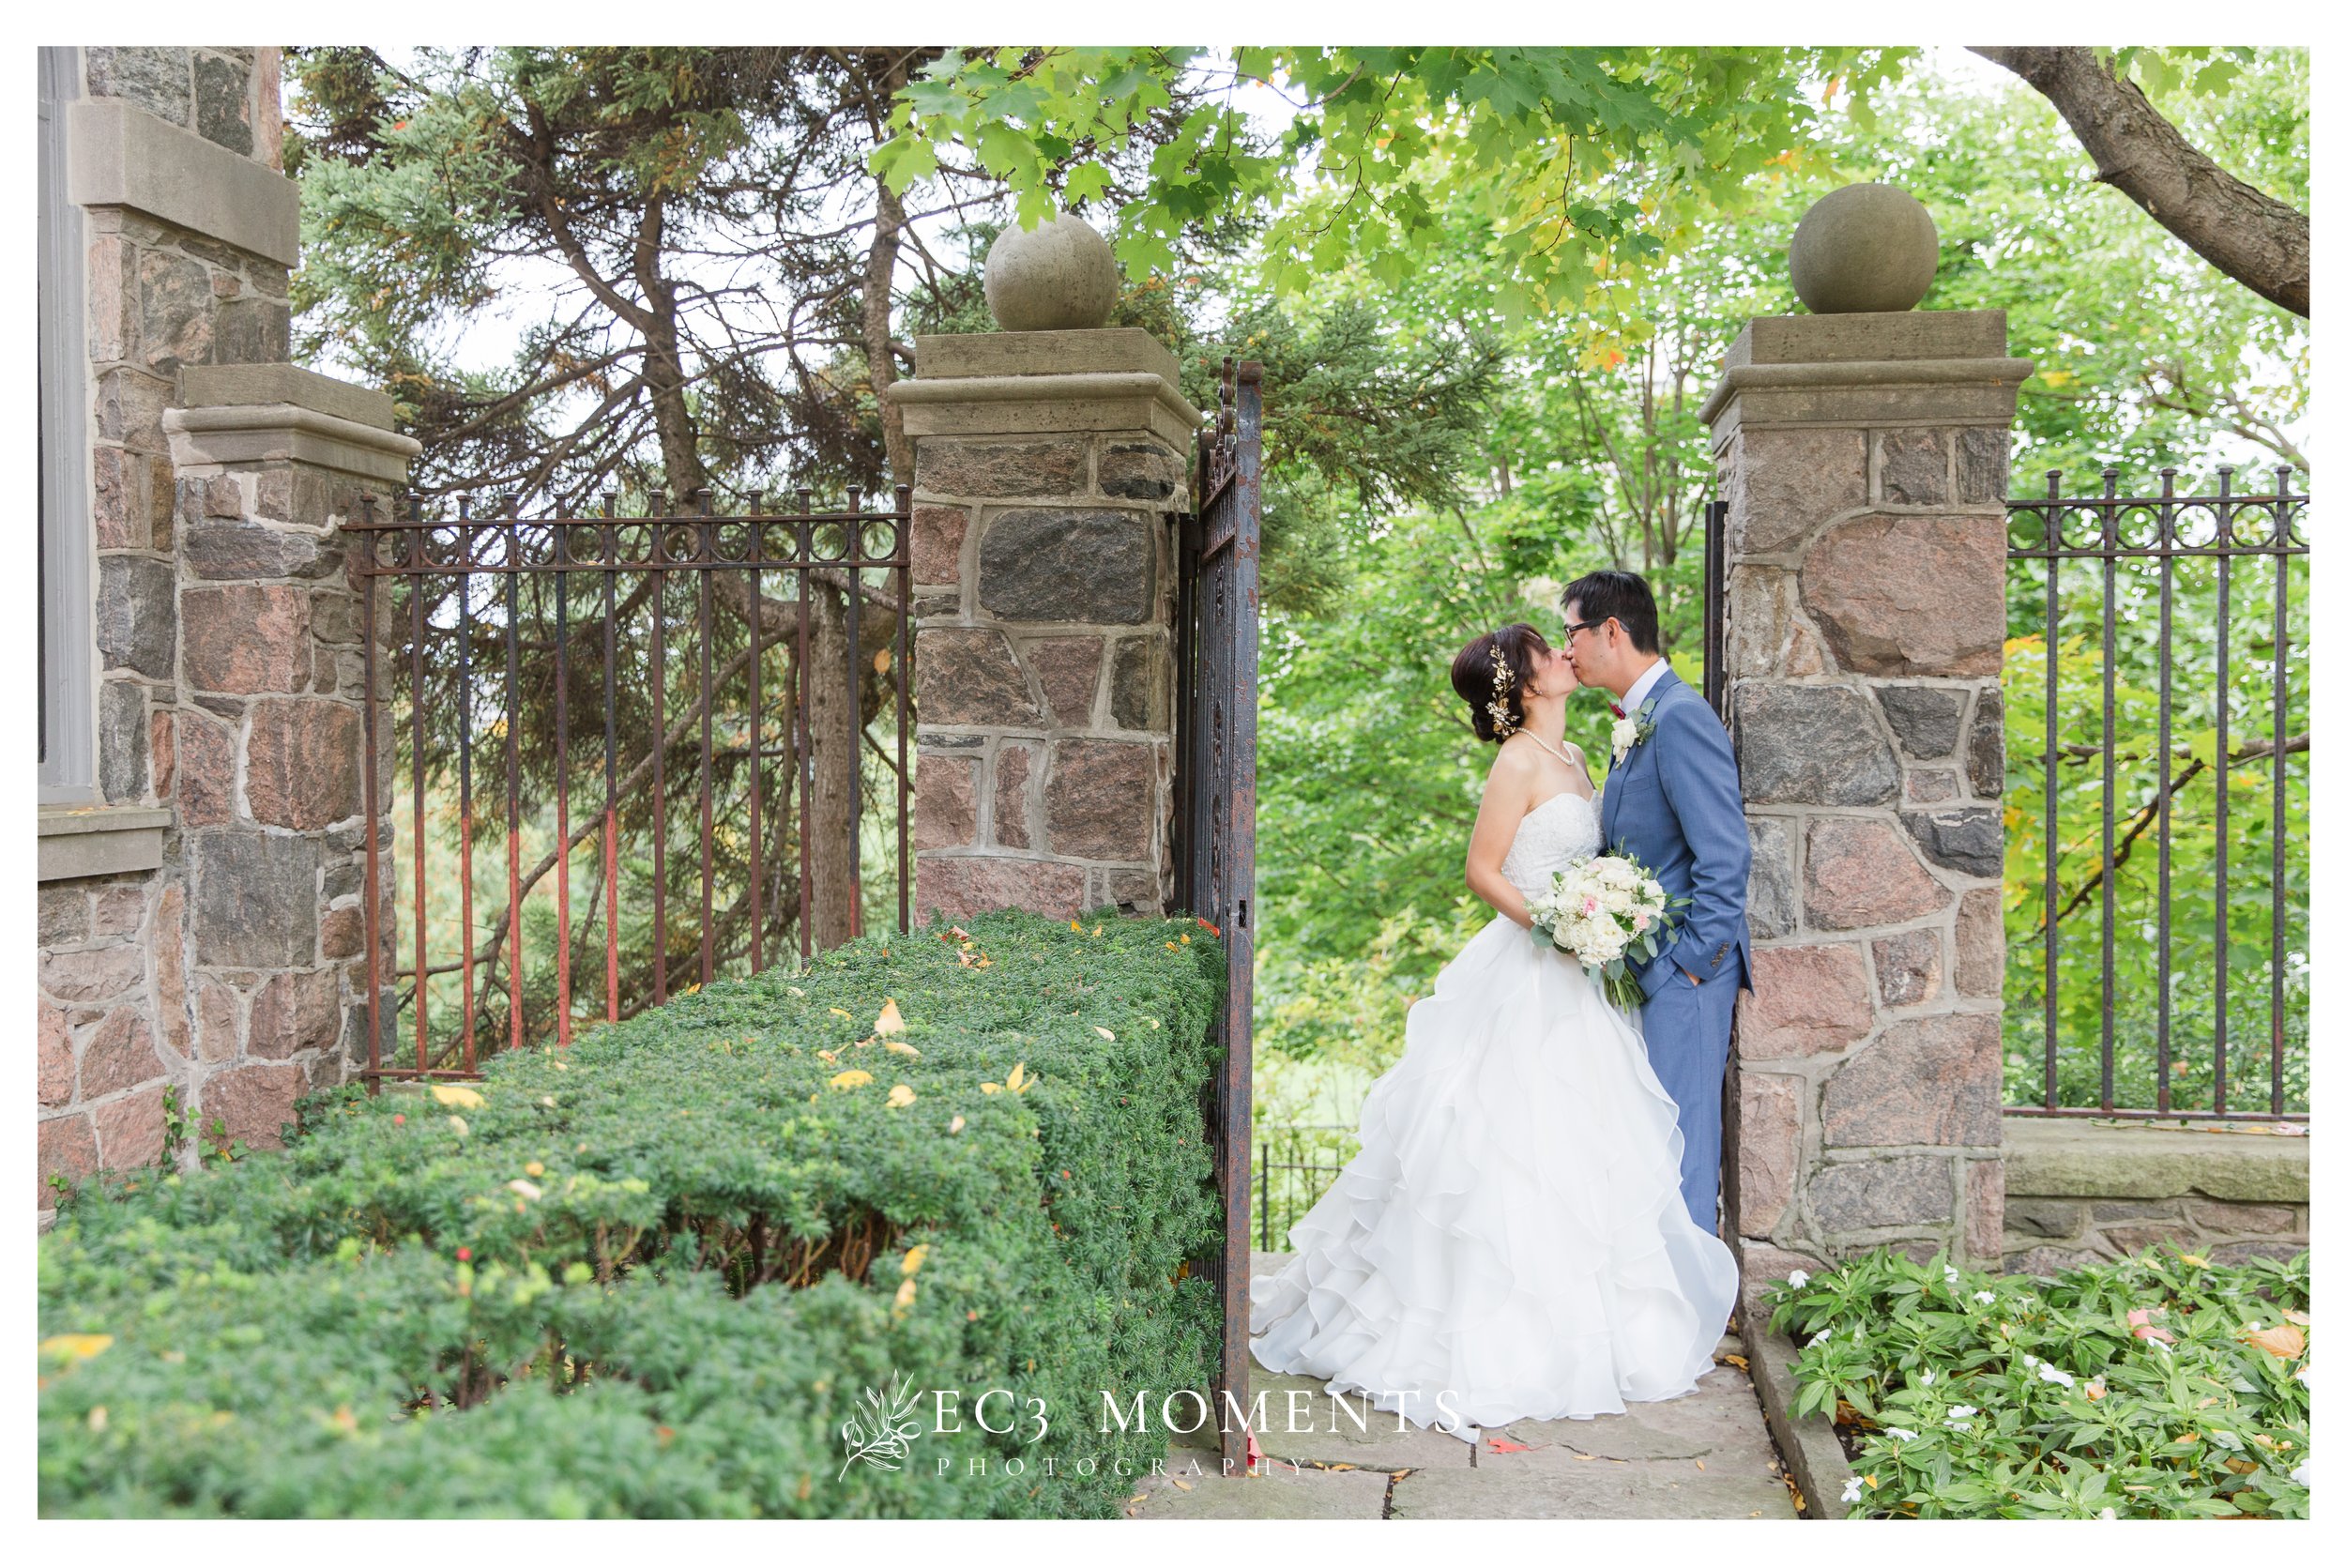  Captured at Graydon Hall Manor by EC3 Moments 